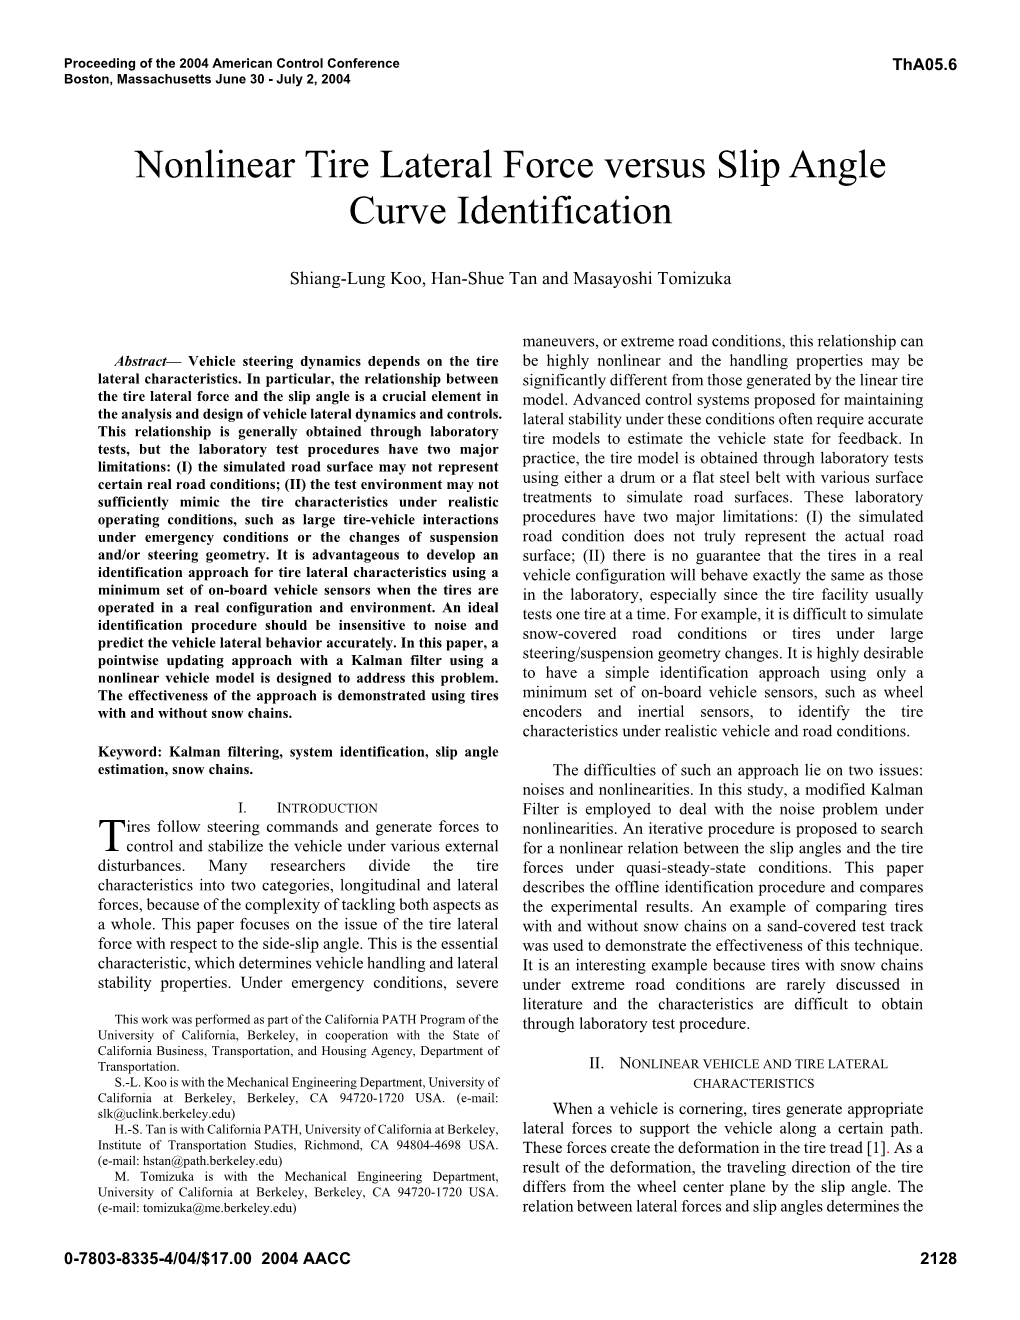 Nonlinear Tire Lateral Force Versus Slip Angle Curve Identification